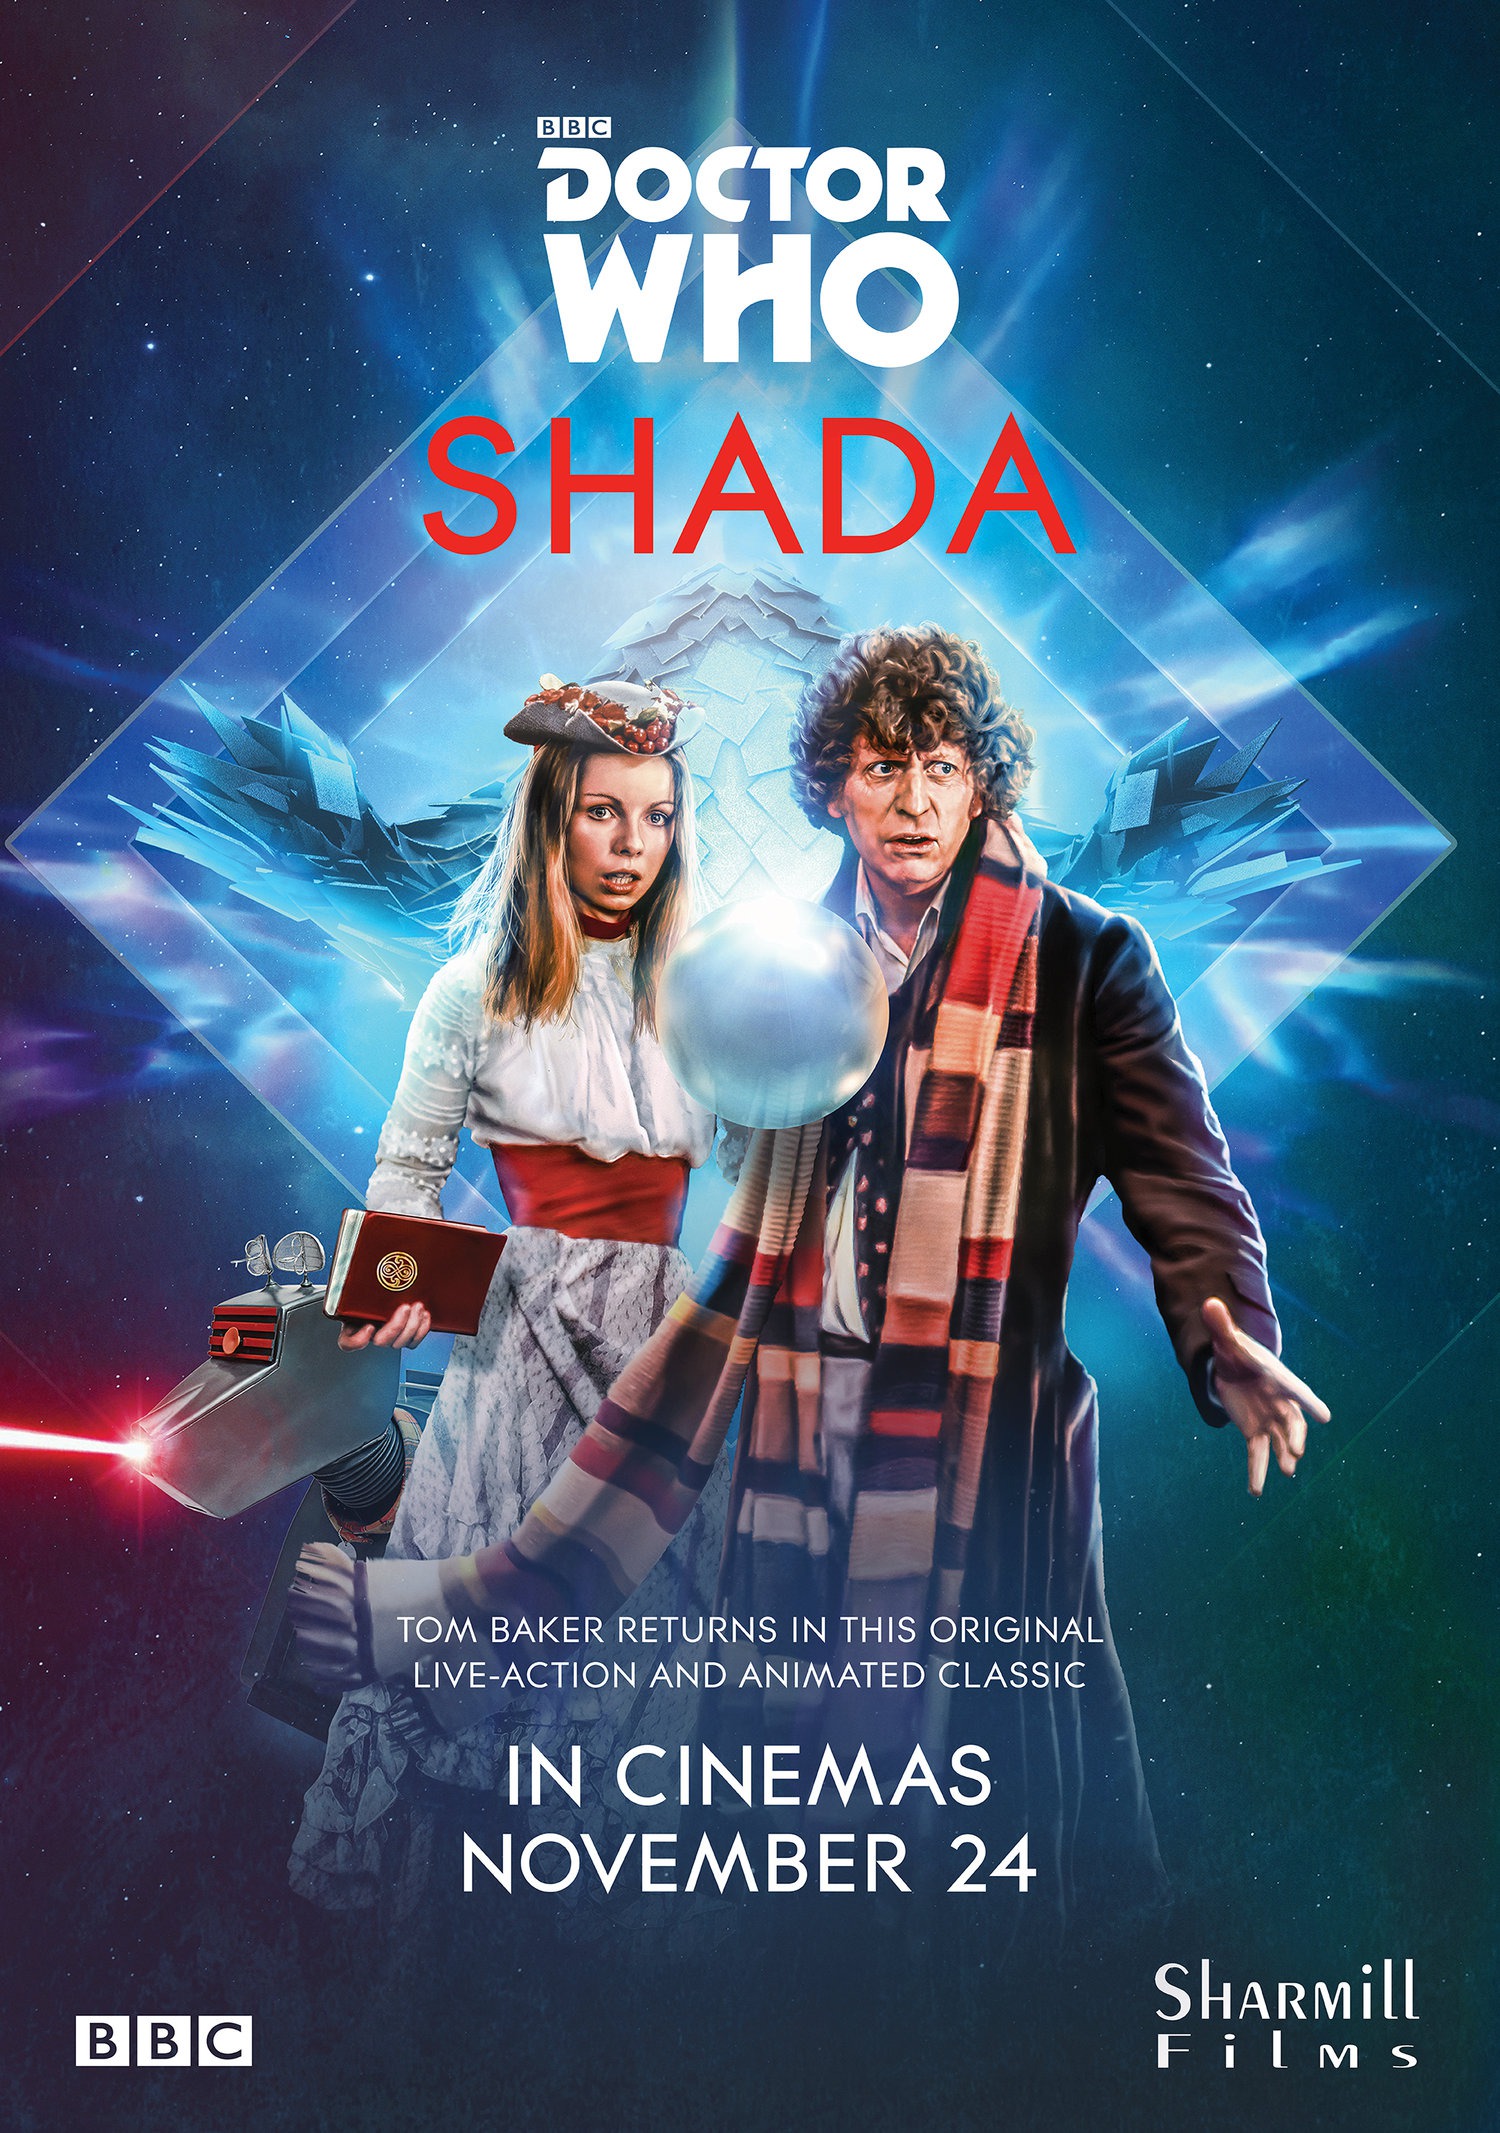 Mega Sized Movie Poster Image for Doctor Who: Shada 